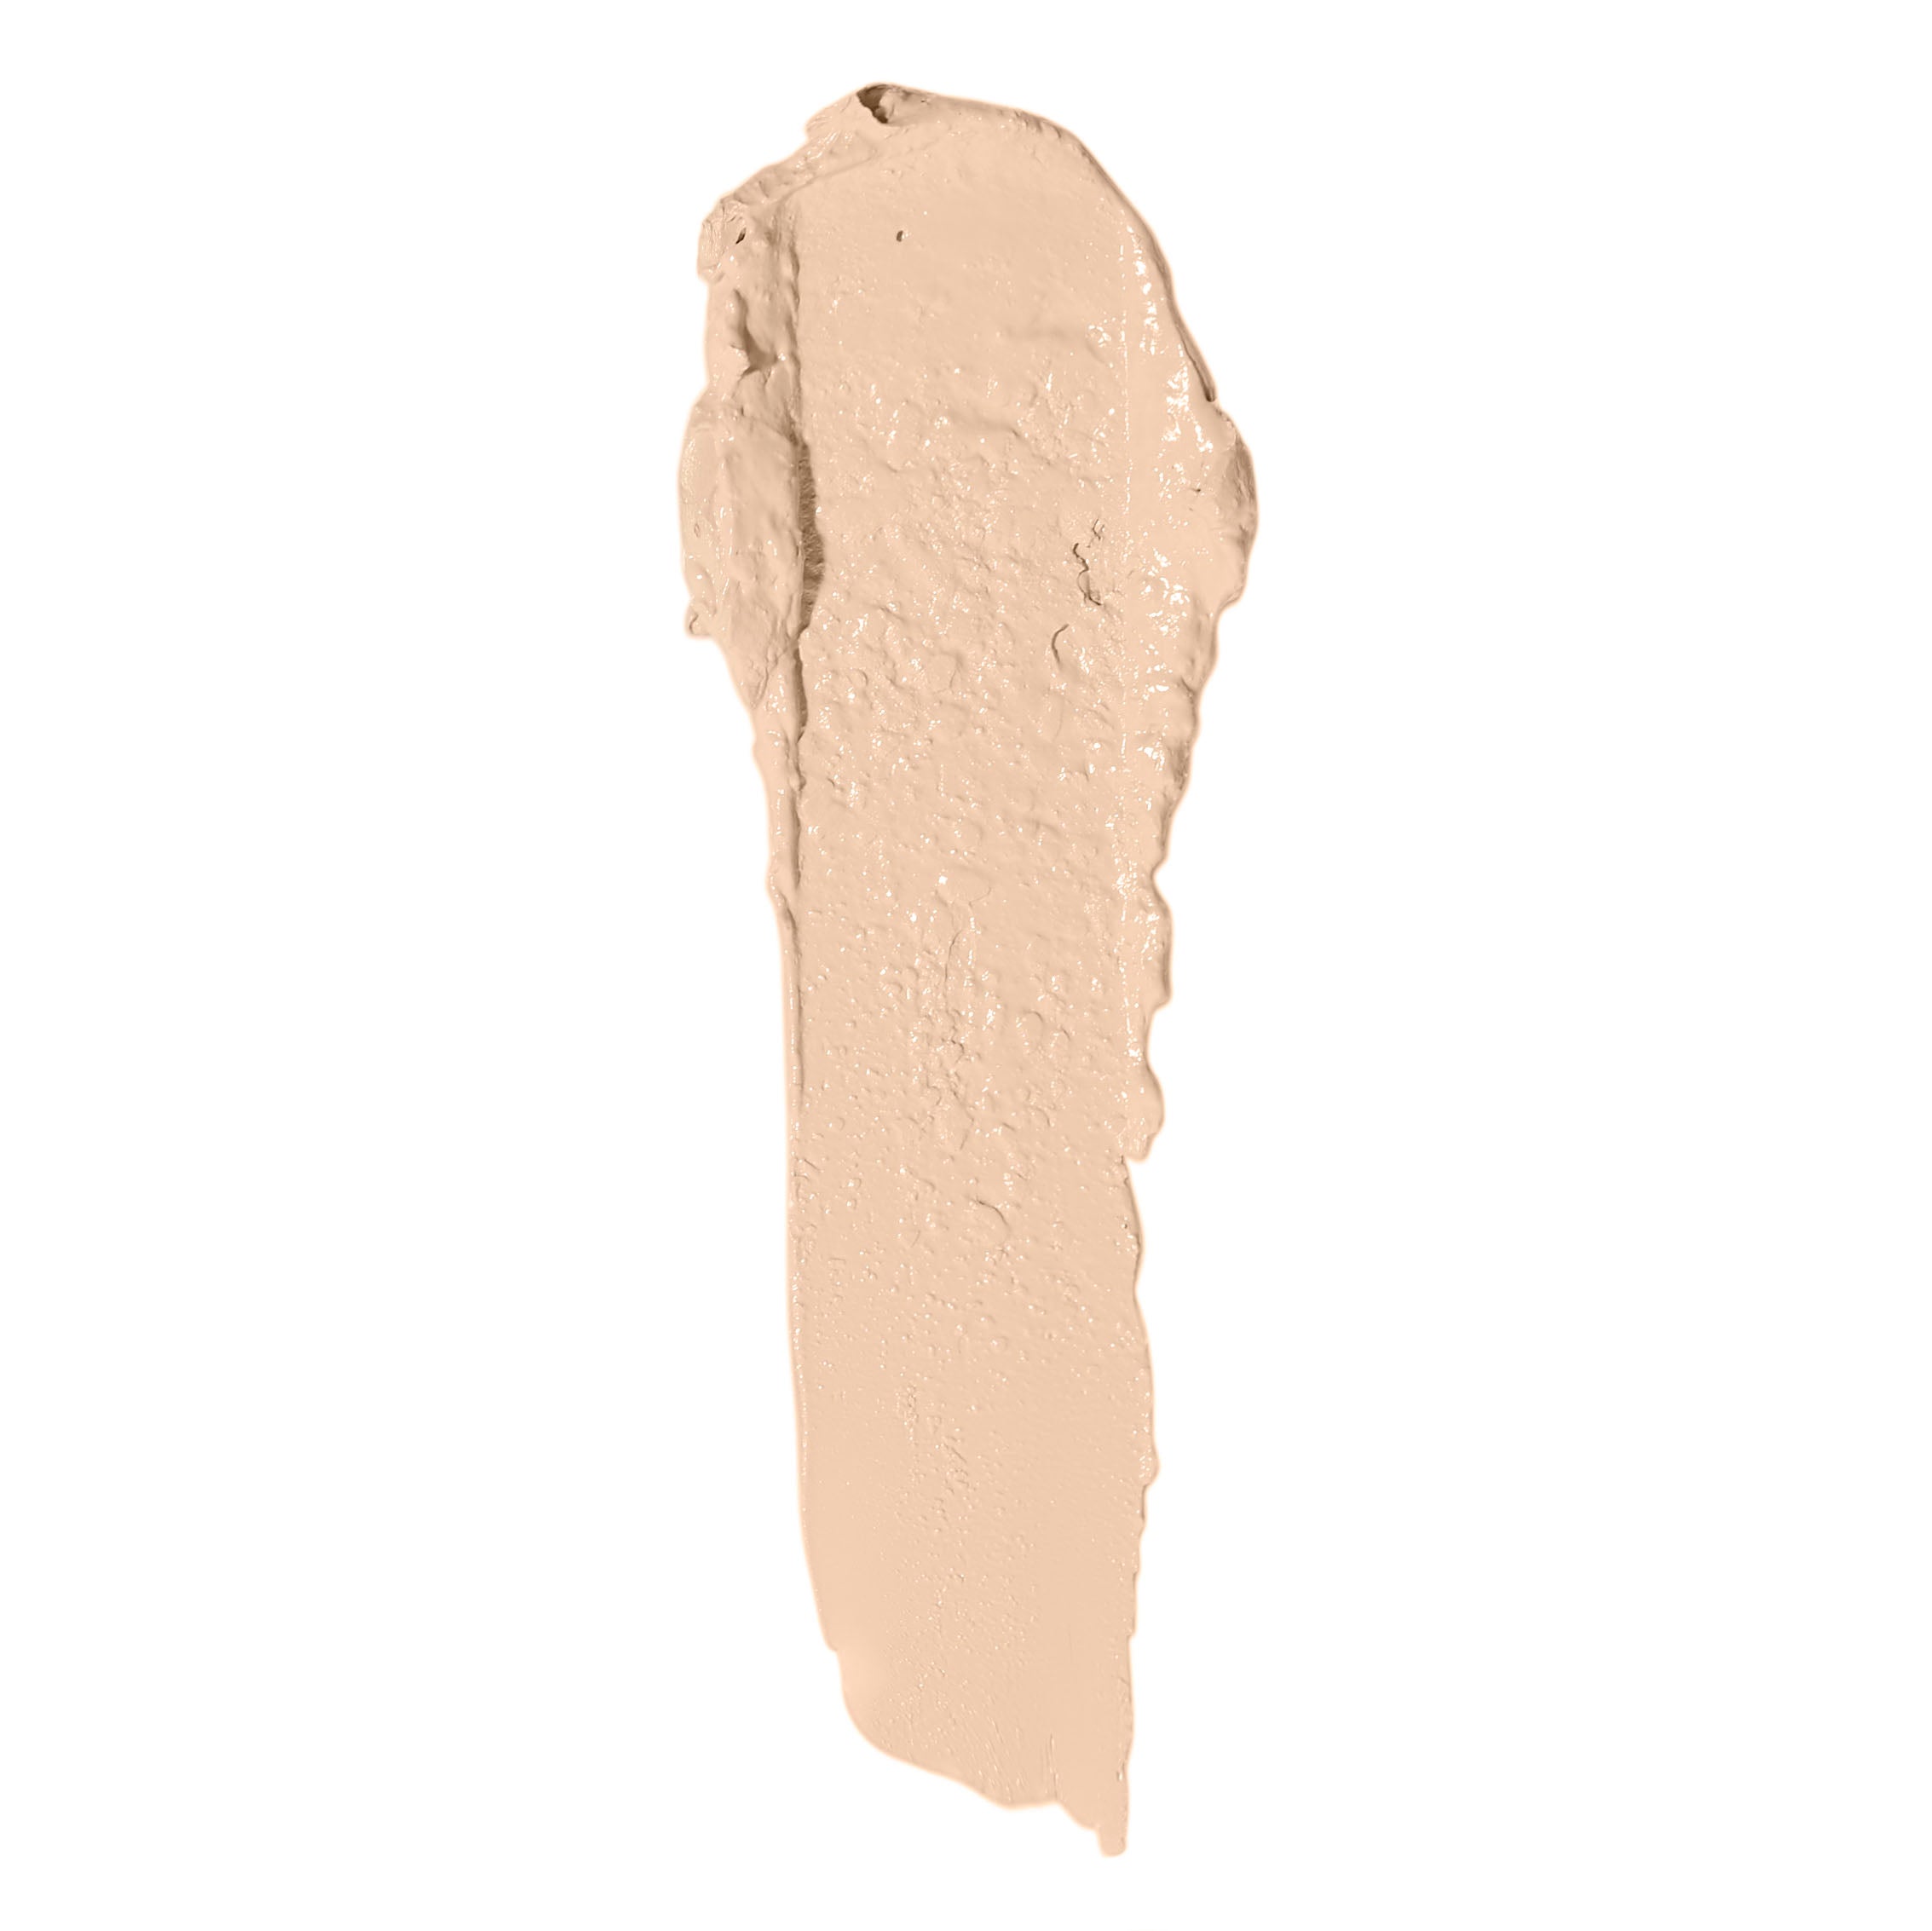 Blunder Cover an All-In-One Foundation/Concealer Shade - Eins - 1